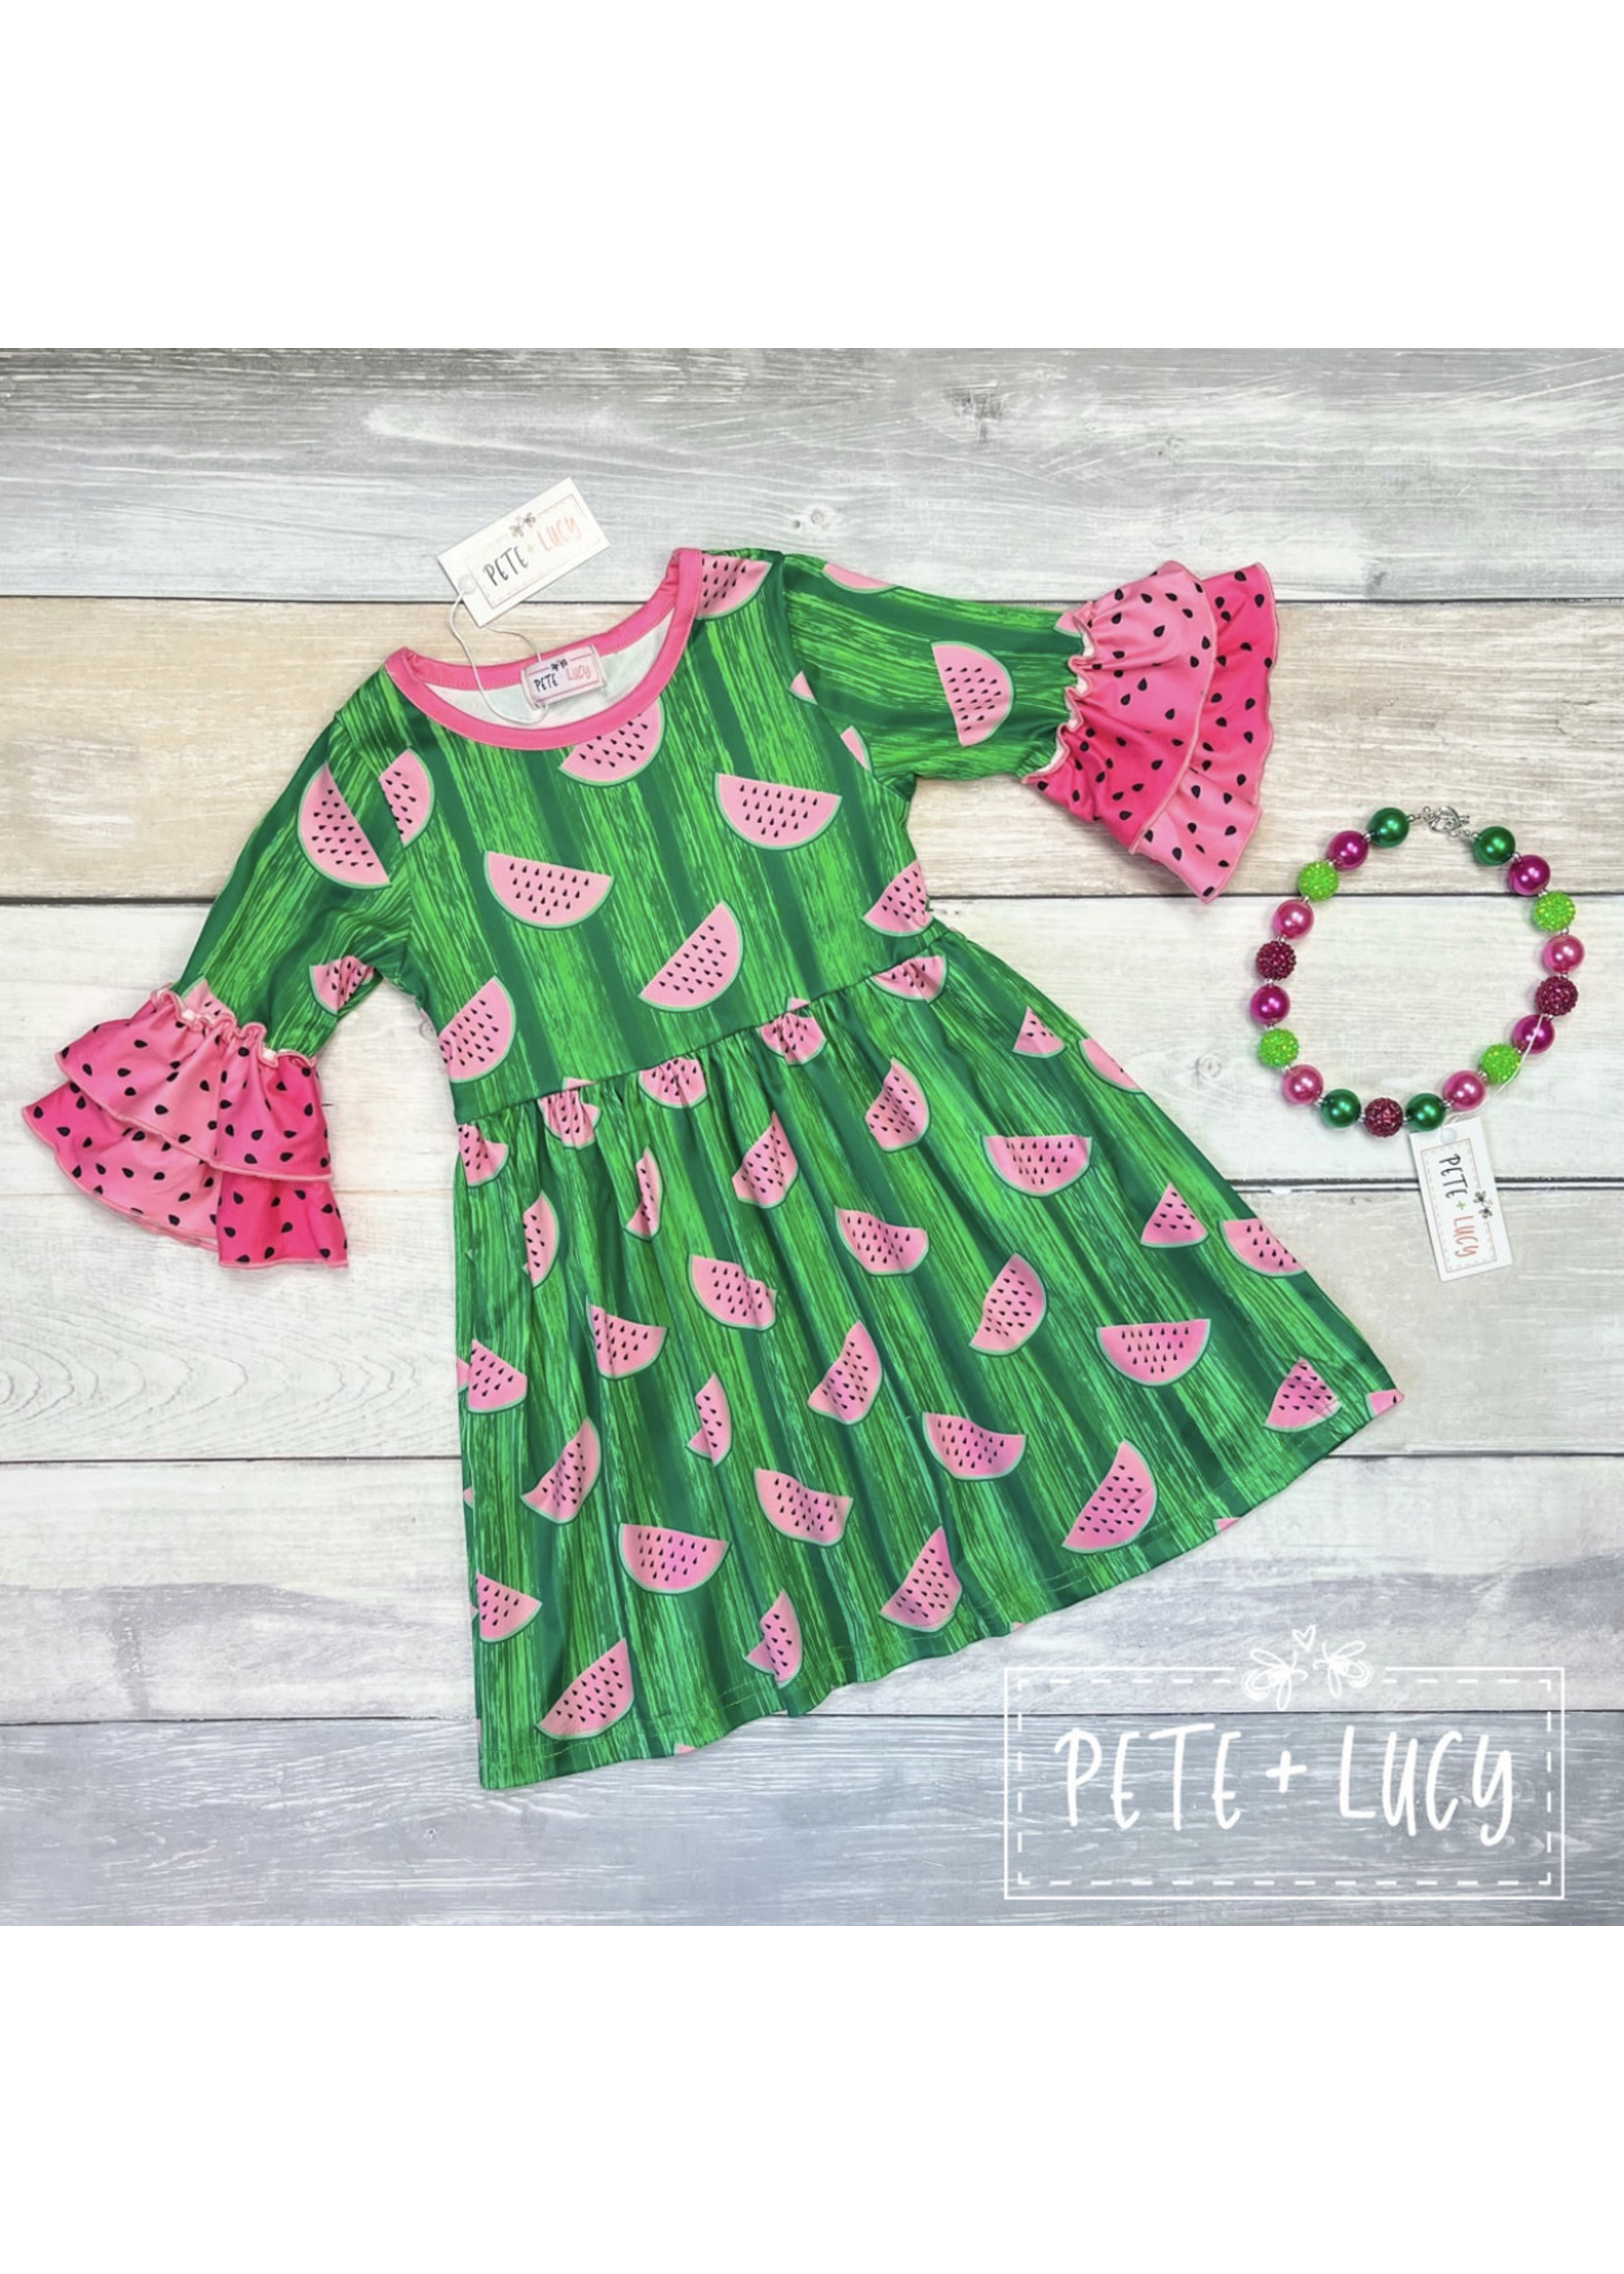 Pete & Lucy P + L Baby Dress